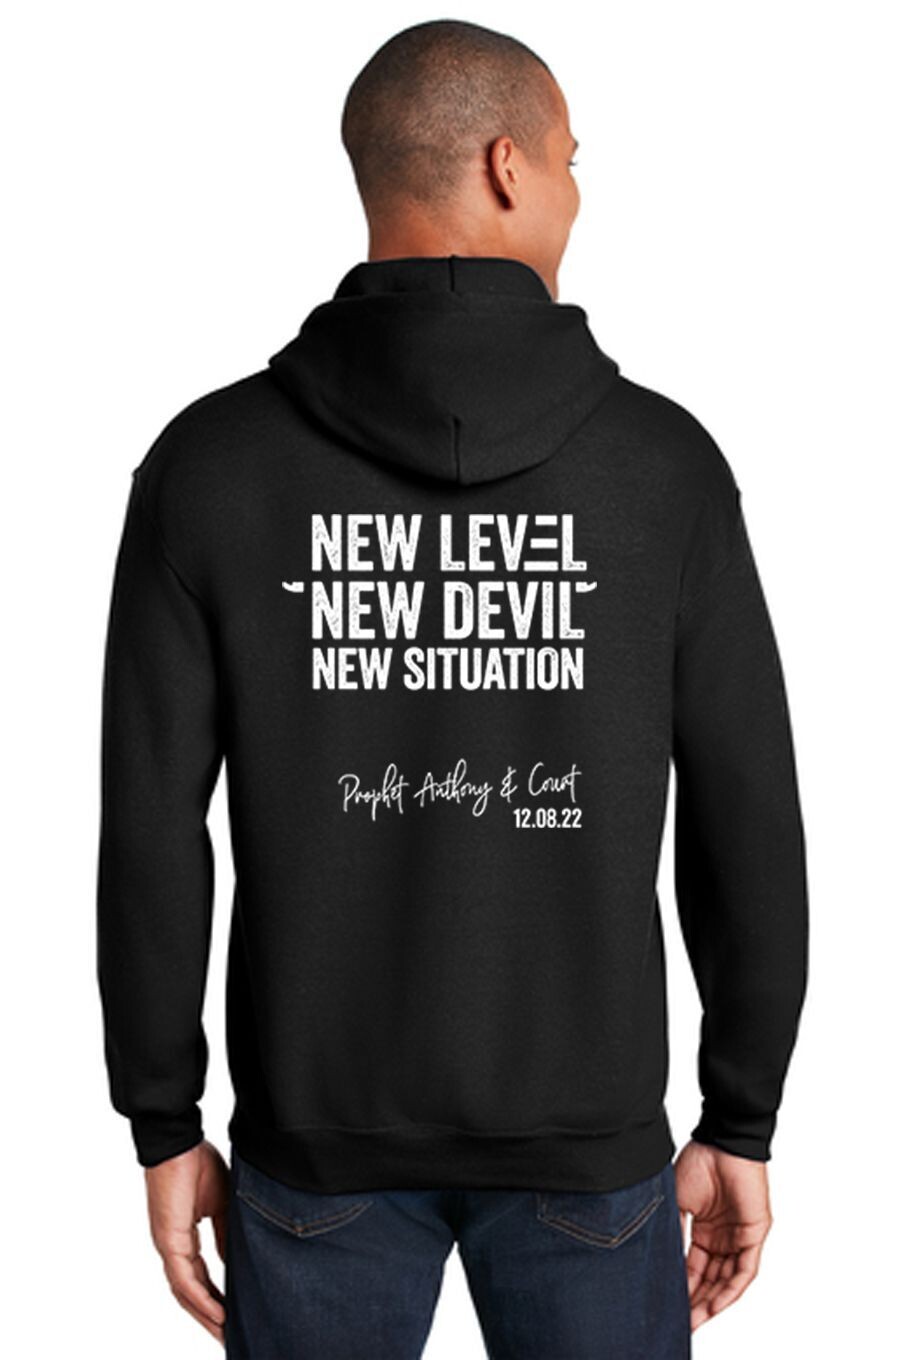 Mighty Flames Ministries "Hoodies" (New Level) 1-Color Print